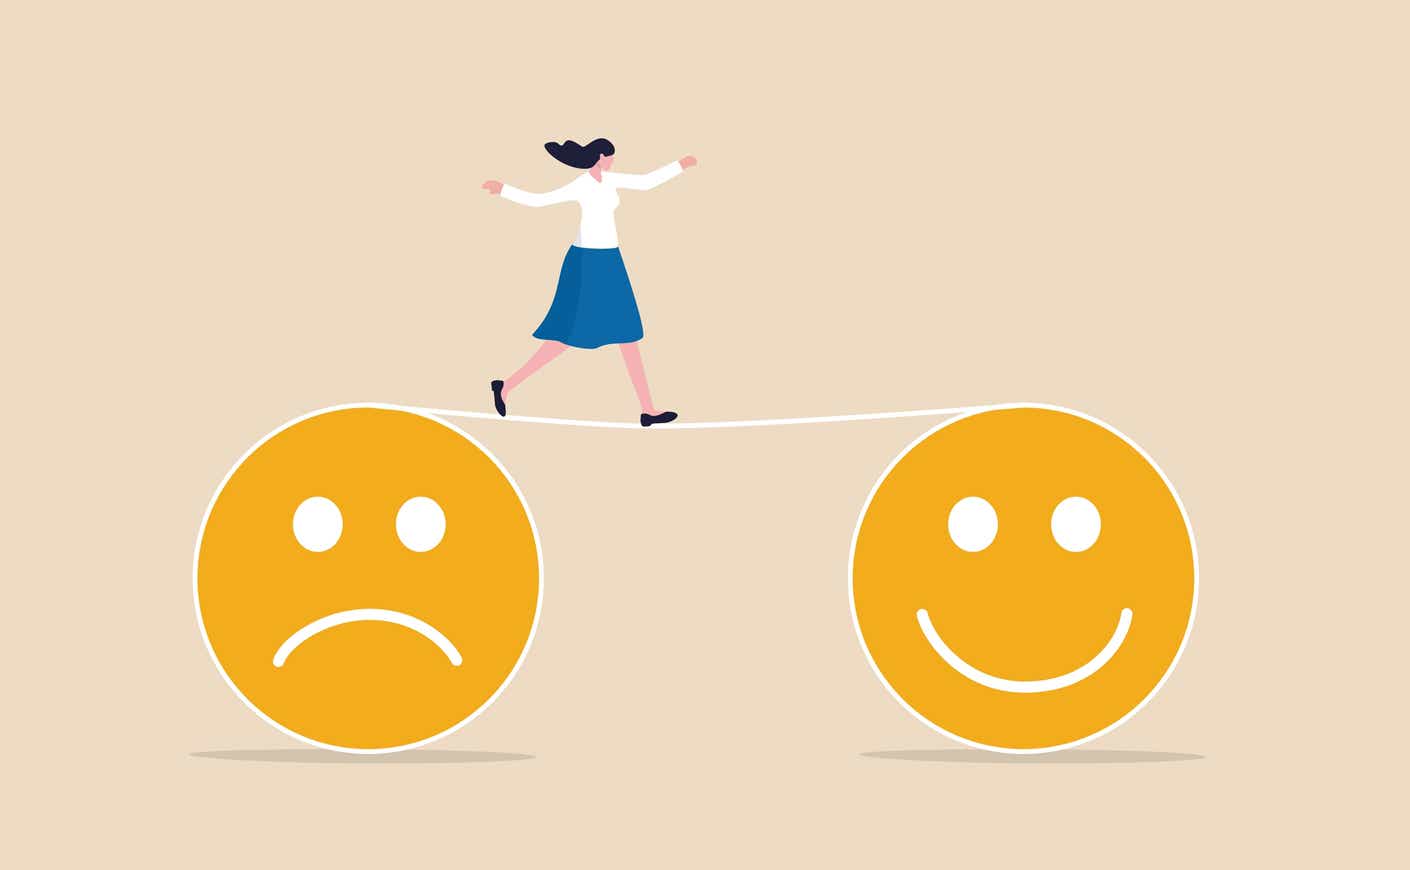 an illustration of a woman on a tight rope, walking from a sad face to a happy face